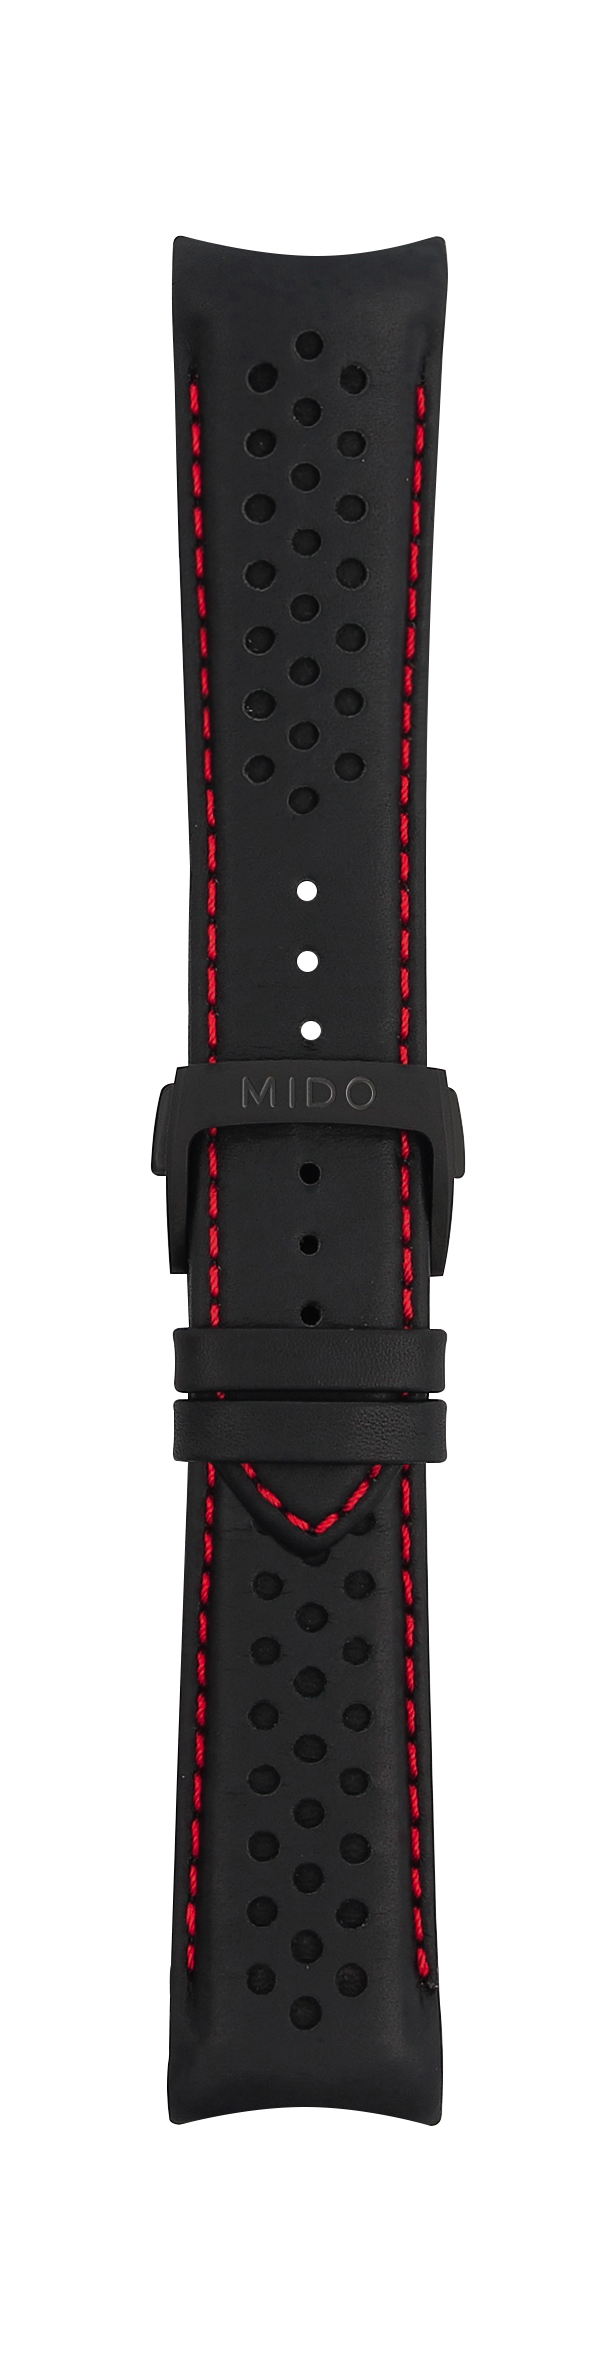 MIDO Multifort M025627A 23mm Black Leather Band Strap - WATCHBAND EXPERT